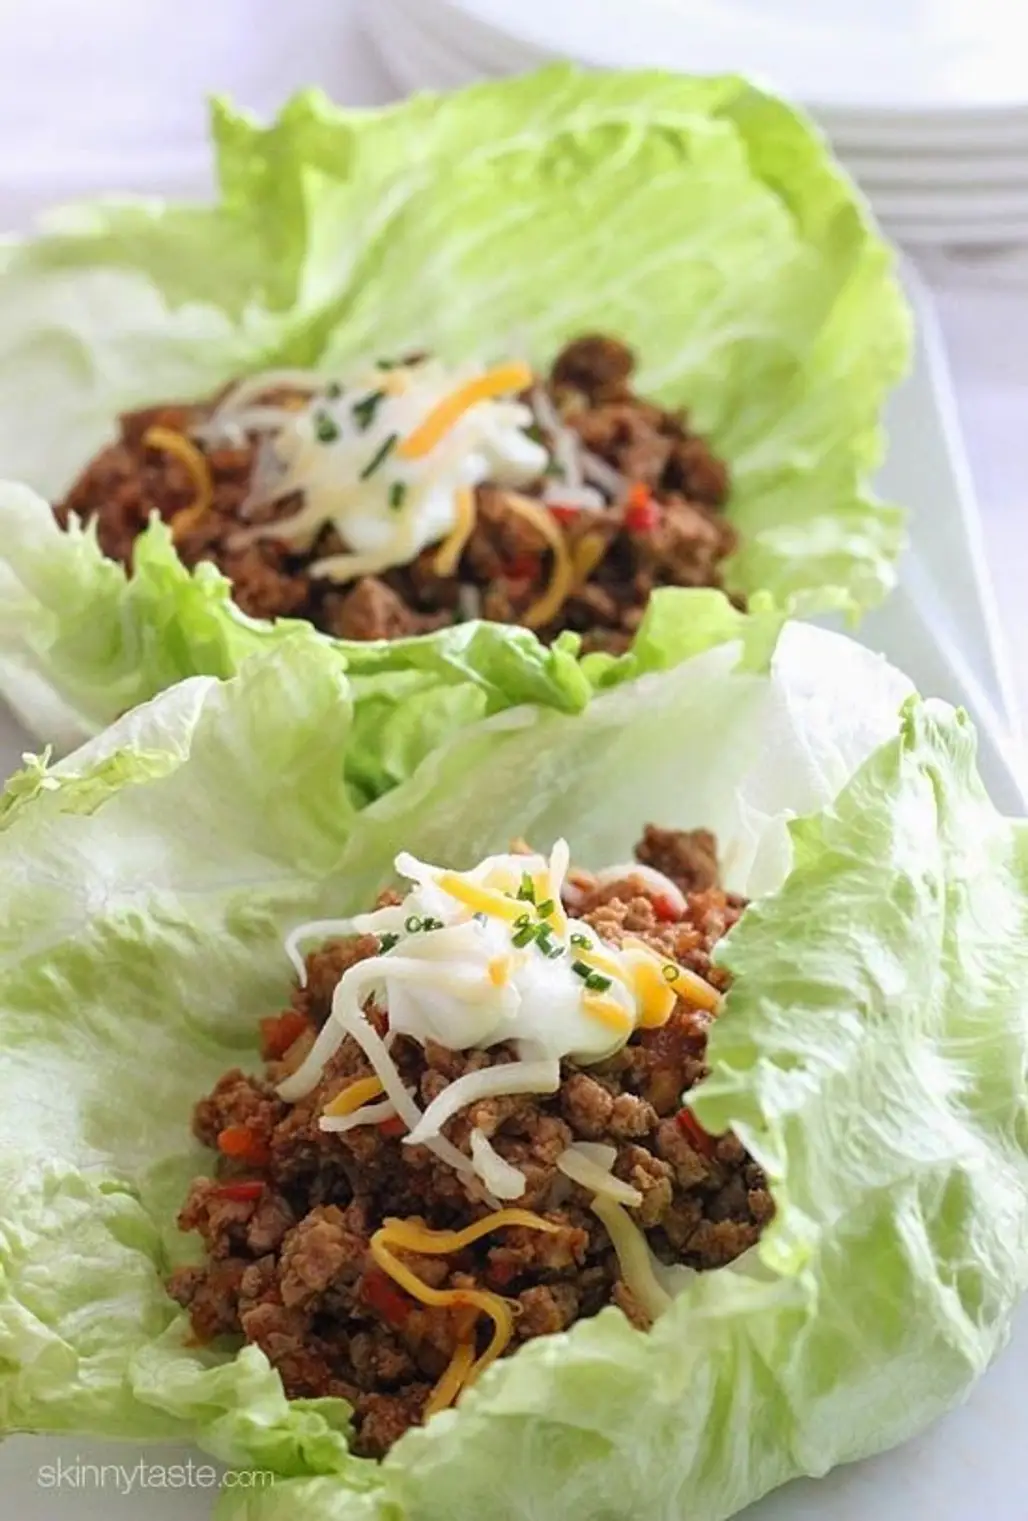 Swap out 2 Taco Shells for Lettuce Wraps